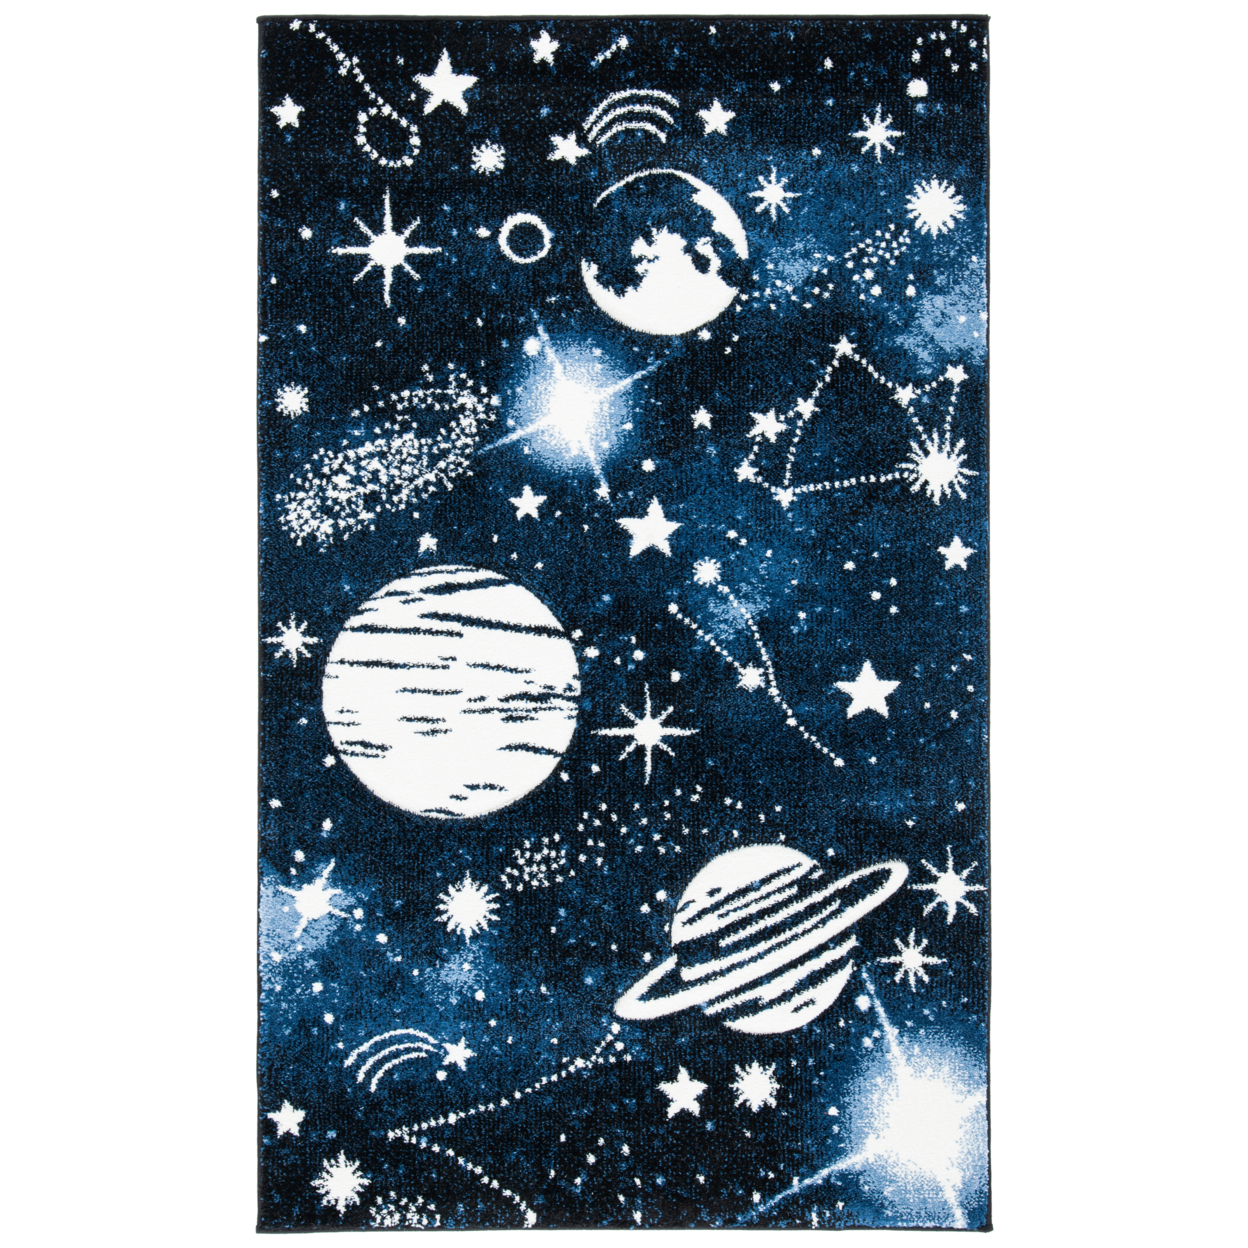 Safavieh Carousel Kids Collection Crk122m Outer Space Area Rug 4' X 6' Dark  B... for sale online eBay